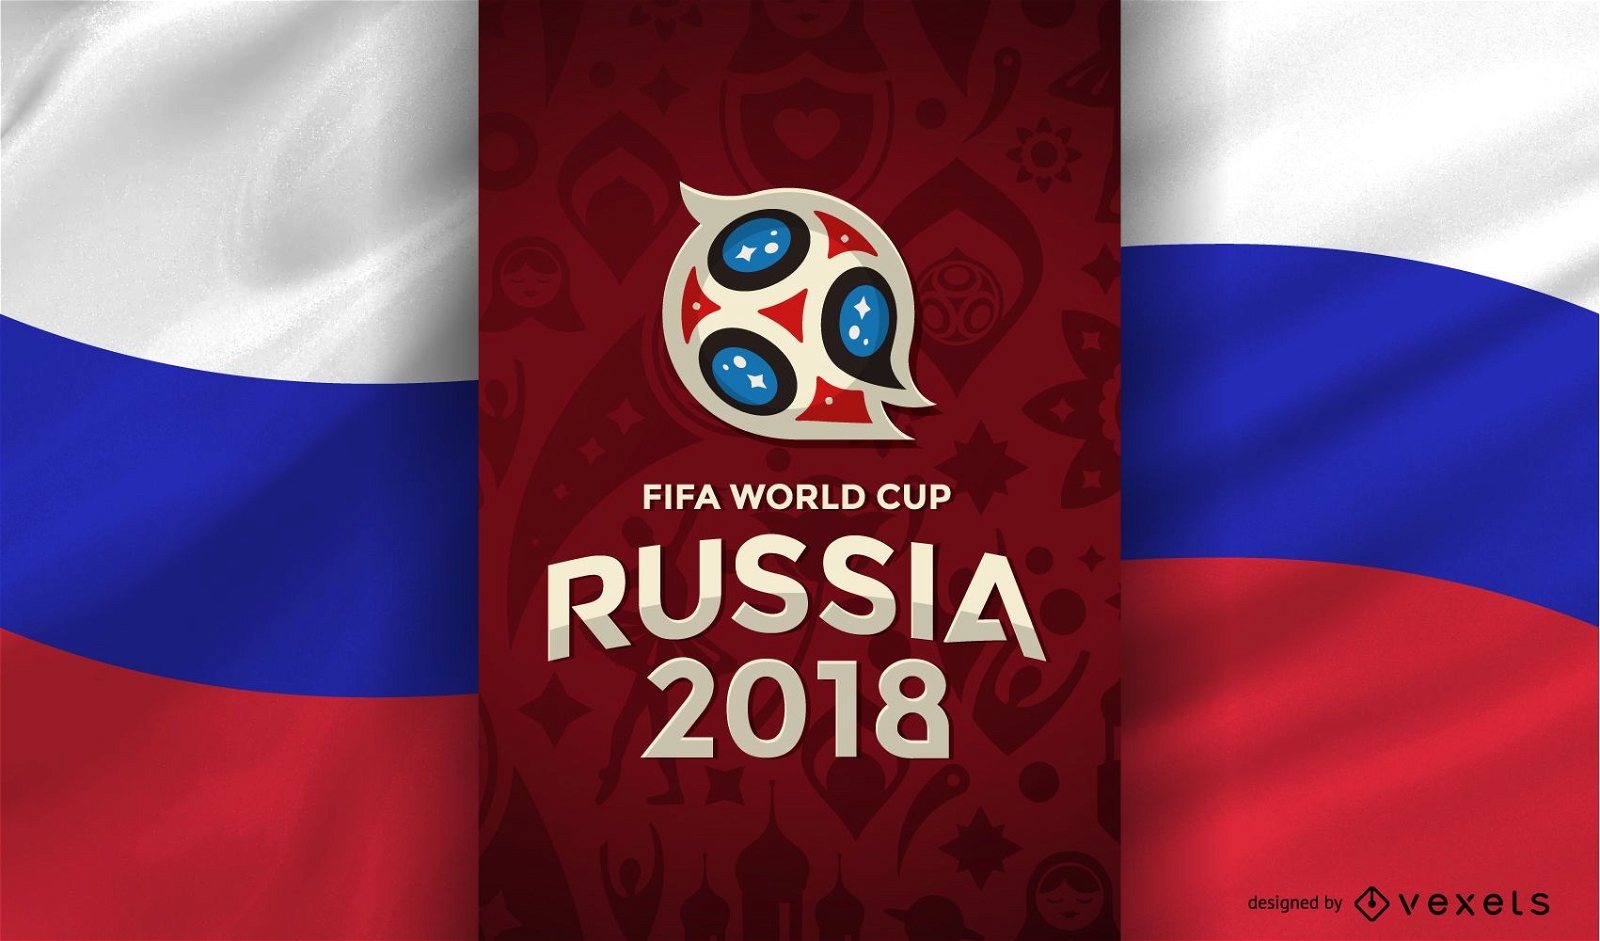 Russia 2018 World Cup with flag